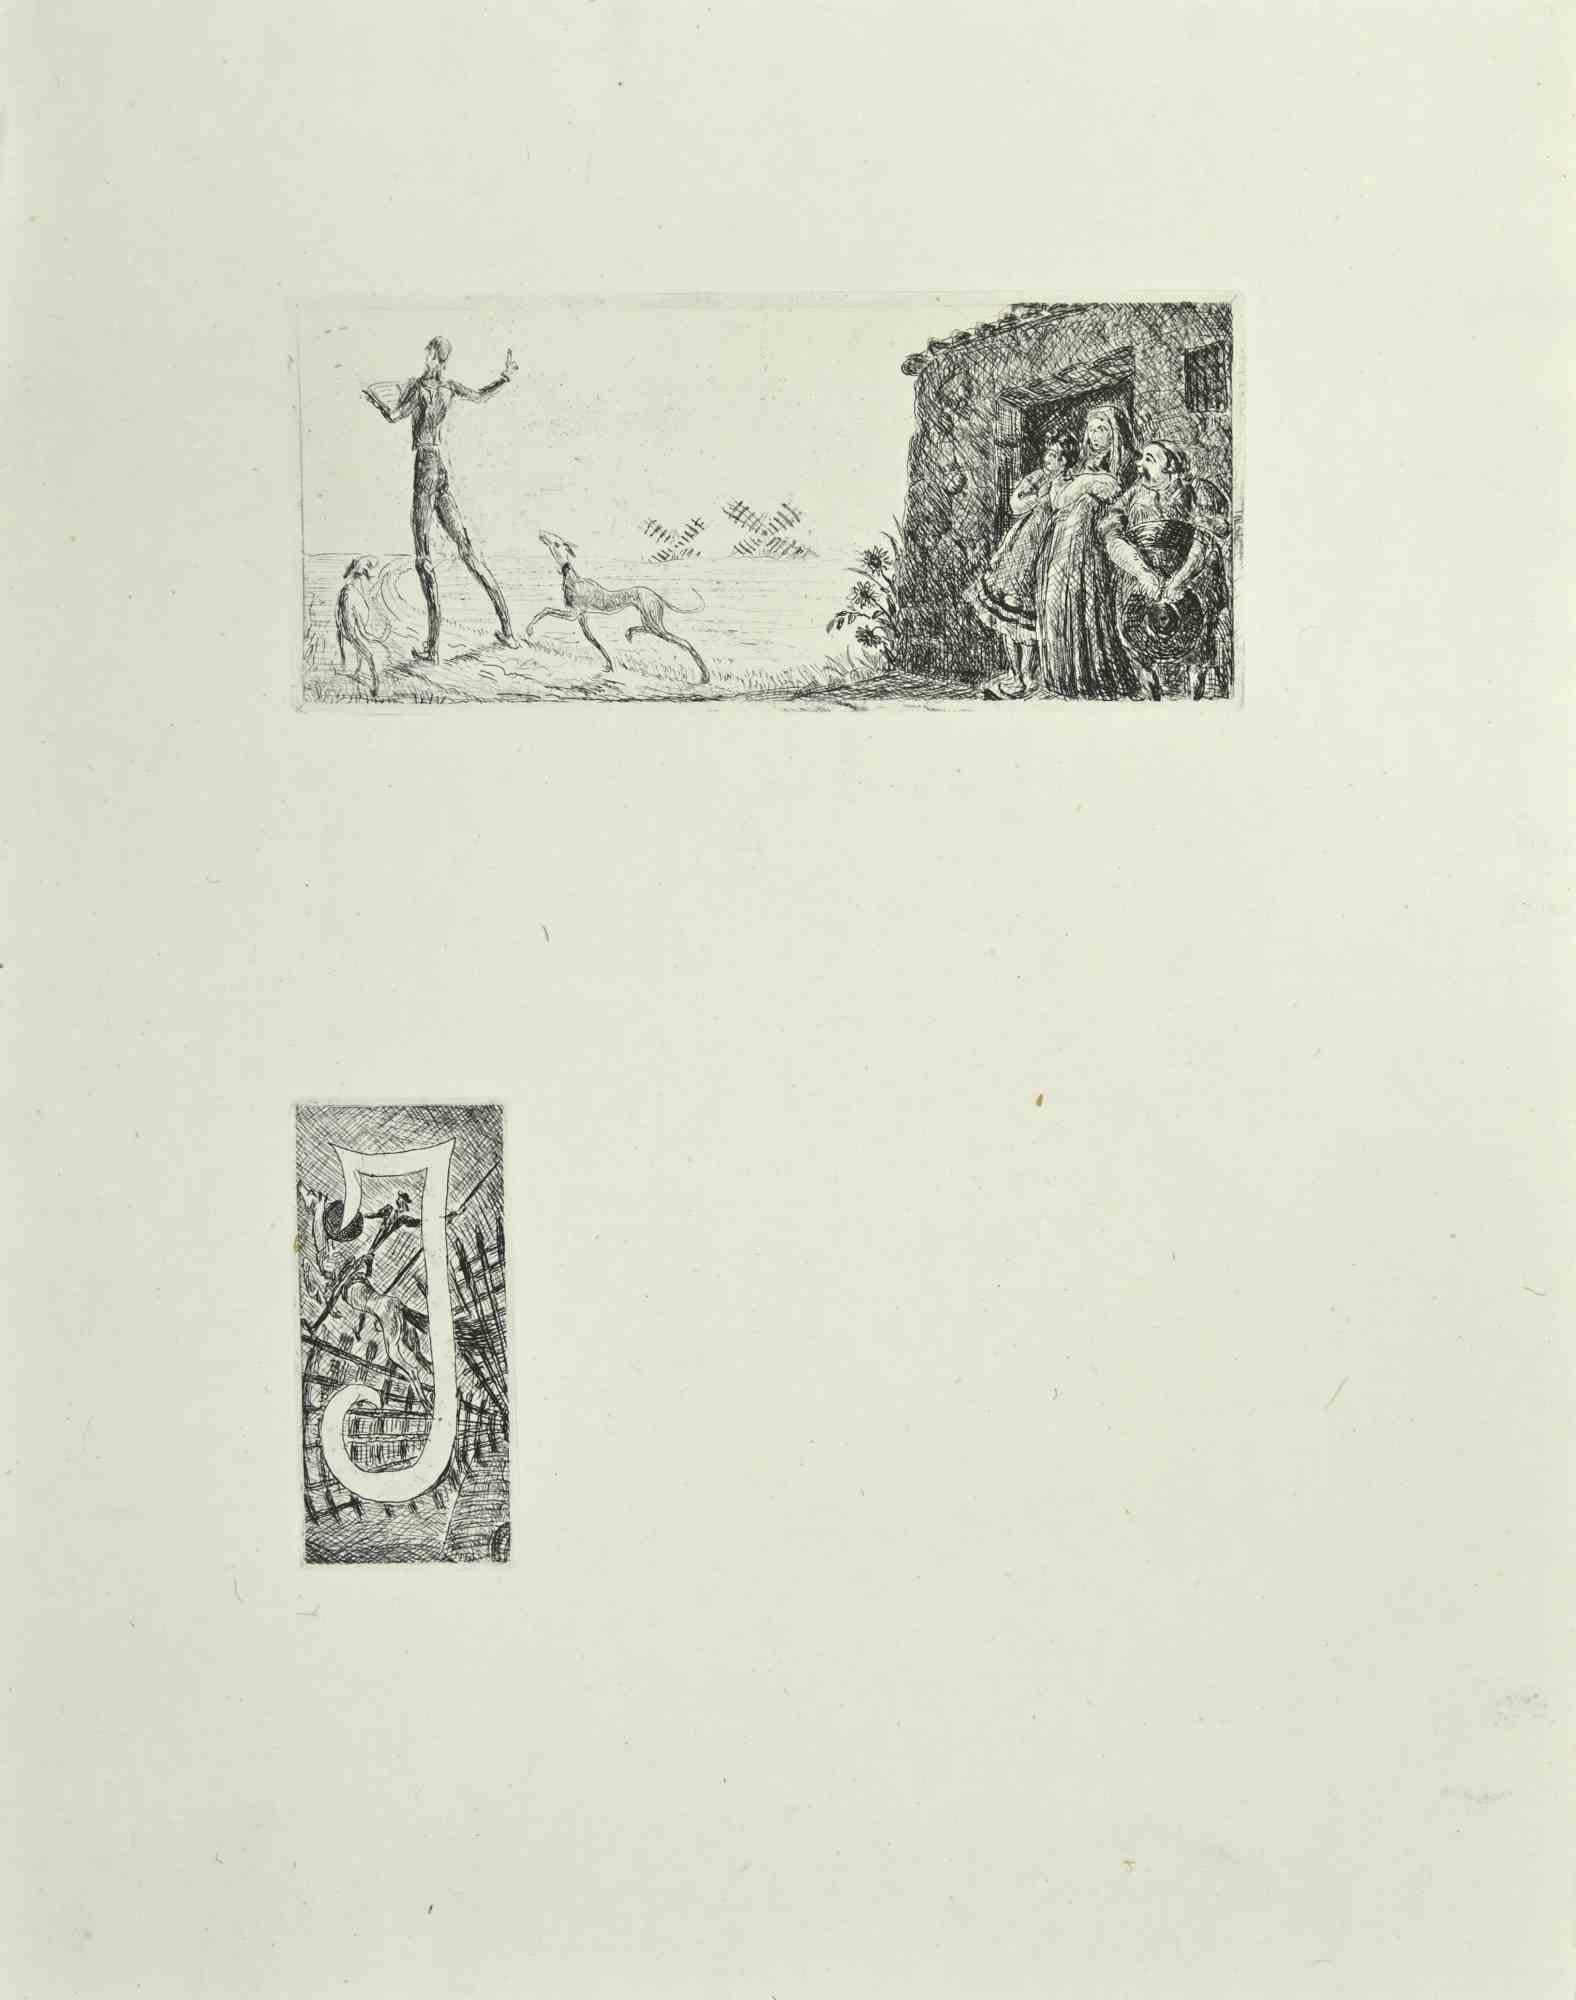 Speech of Don Quixote is an etching and drypoint print on ivory-colored China paper, realized by Wladyslaw Jahl in 1951.

It belongs to a limited edition of 125 specimens.

Good conditions.

The artwork represents a visual scene from Don Quixote